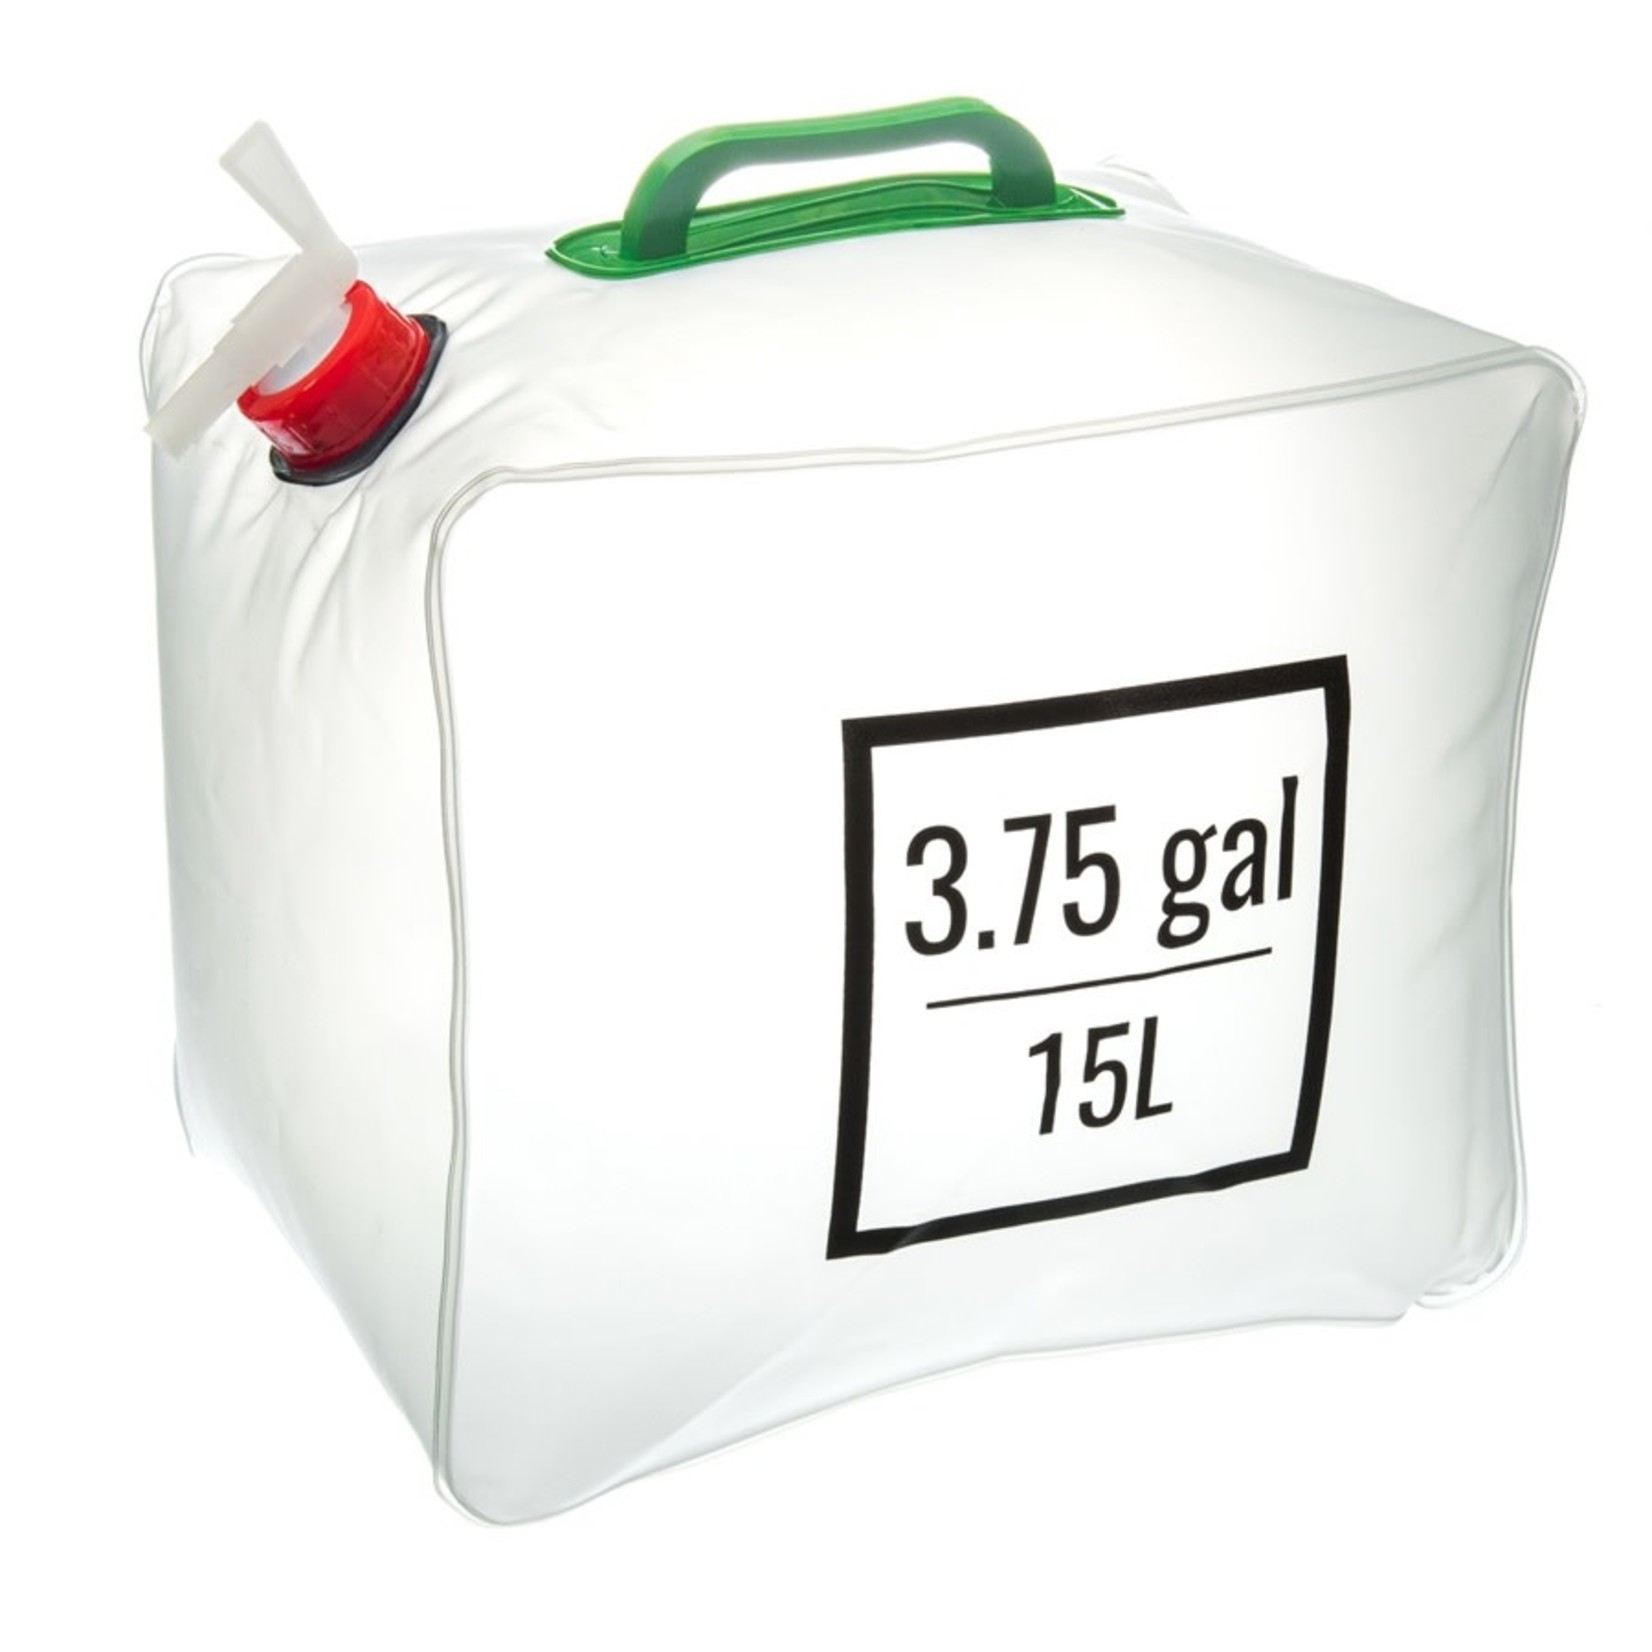 Sona SE Collapsible Water Carrier 3.75 gallon